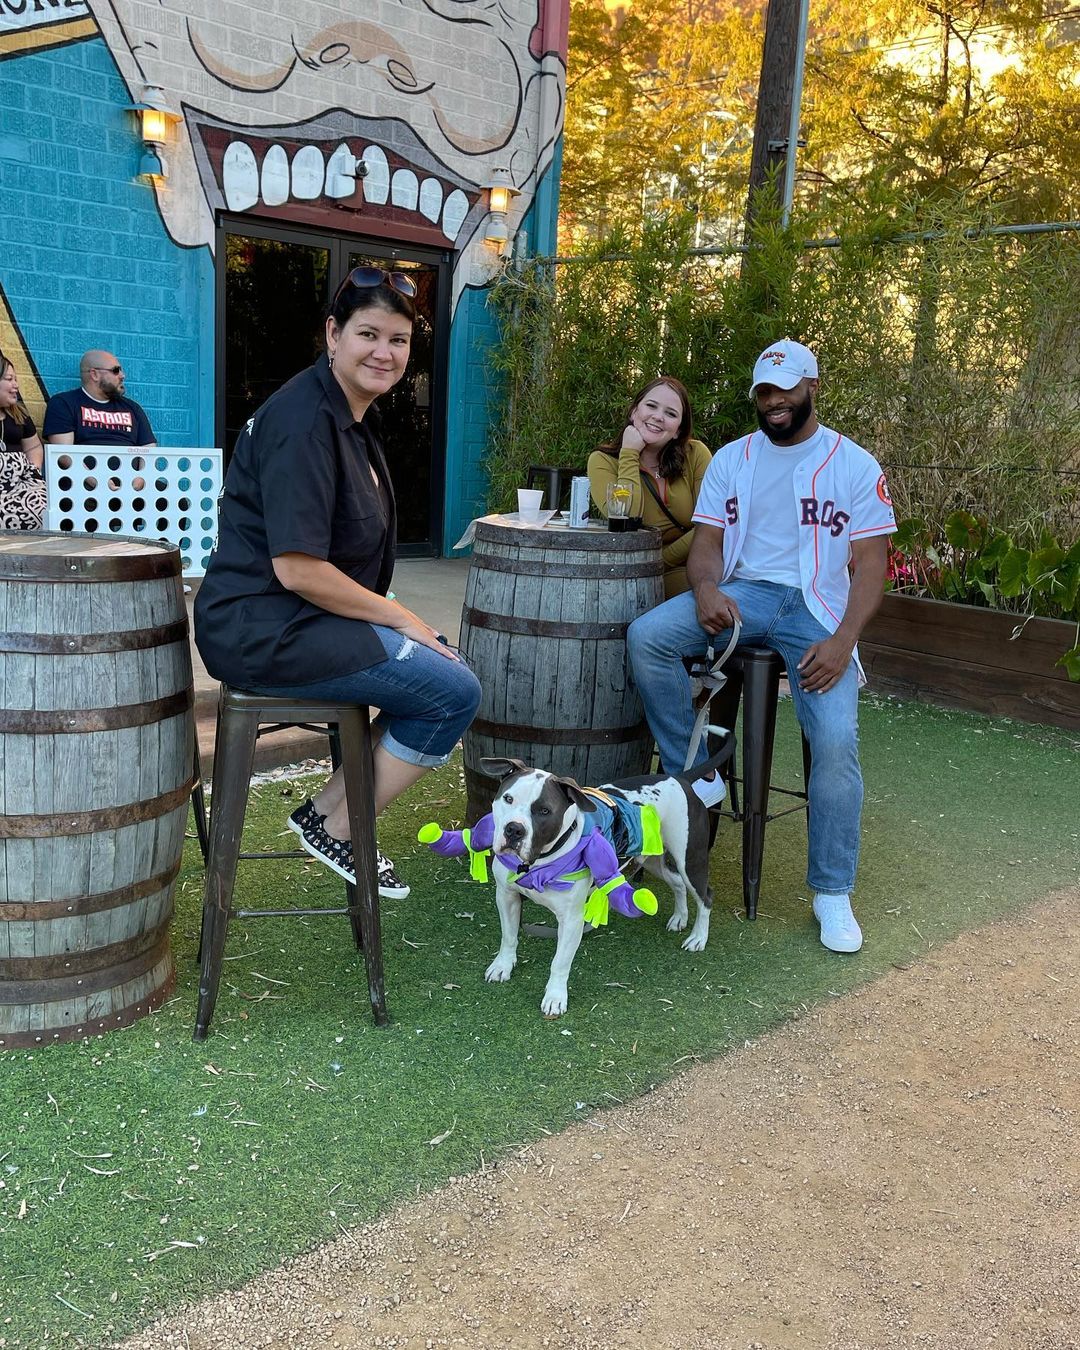 .
Happy <a target='_blank' href='https://www.instagram.com/explore/tags/TBT/'>#TBT</a> !!

We wanted to share a couple of pictures and videos from our Halloween Event on 10/30/21 @socialbeergardenhtx .

🏆 Our first place winner was sweet little @helloonorman , he was the cutest little Simba! 🥰 🦁 
🏆 Second place was our handsome Duke who was the coolest  Buzz Lightyear! 😍 👩‍🚀 

We were happy to see some of our BBR friends and <a target='_blank' href='https://www.instagram.com/explore/tags/BBRalumni/'>#BBRalumni</a> and can’t wait for our next event!